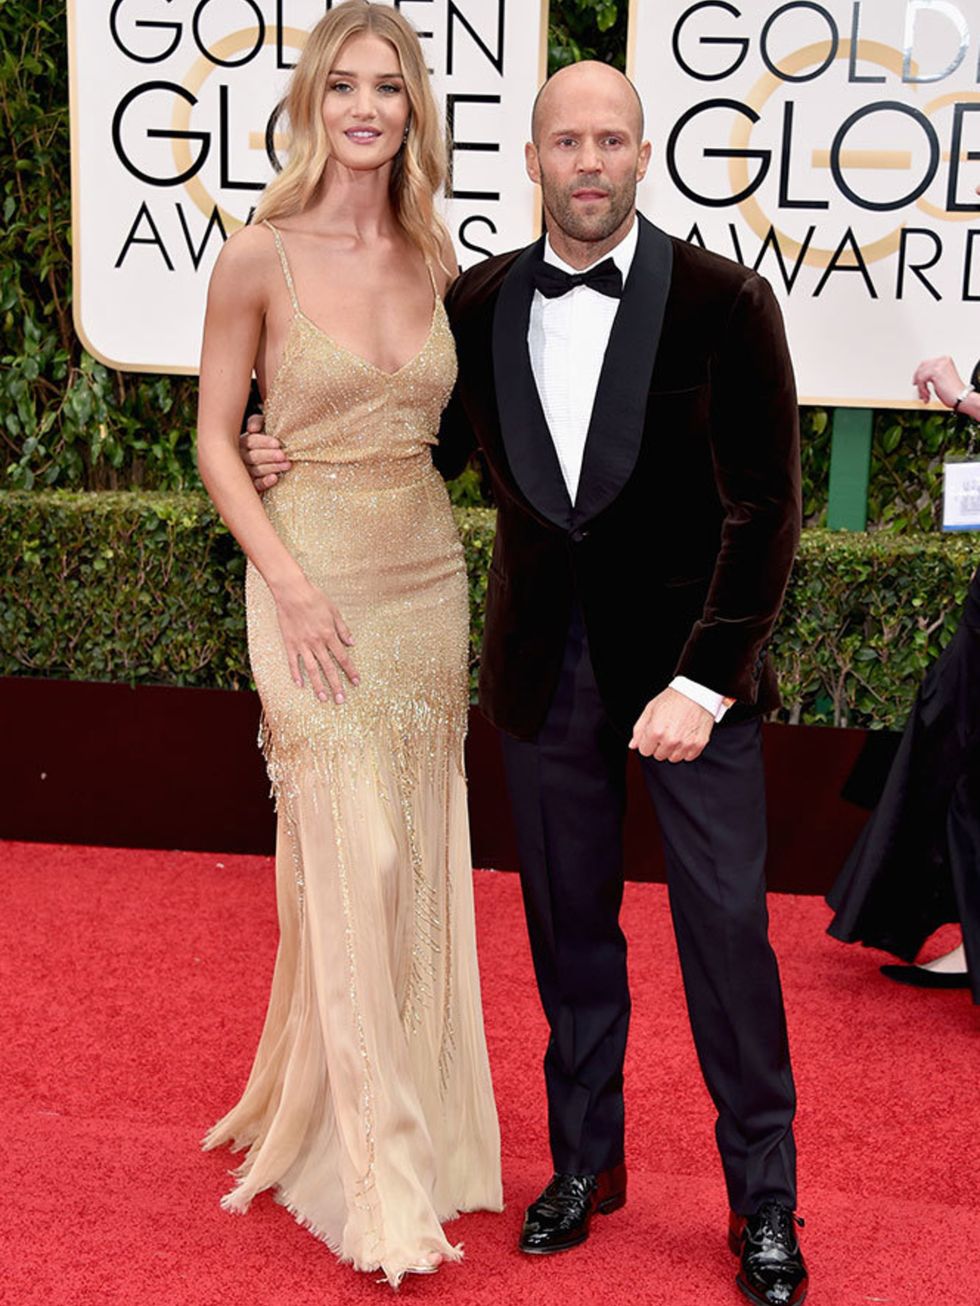 Rosie Huntington-Whiteley and Jason Statham attend the Golden awards in LA, January 2016.